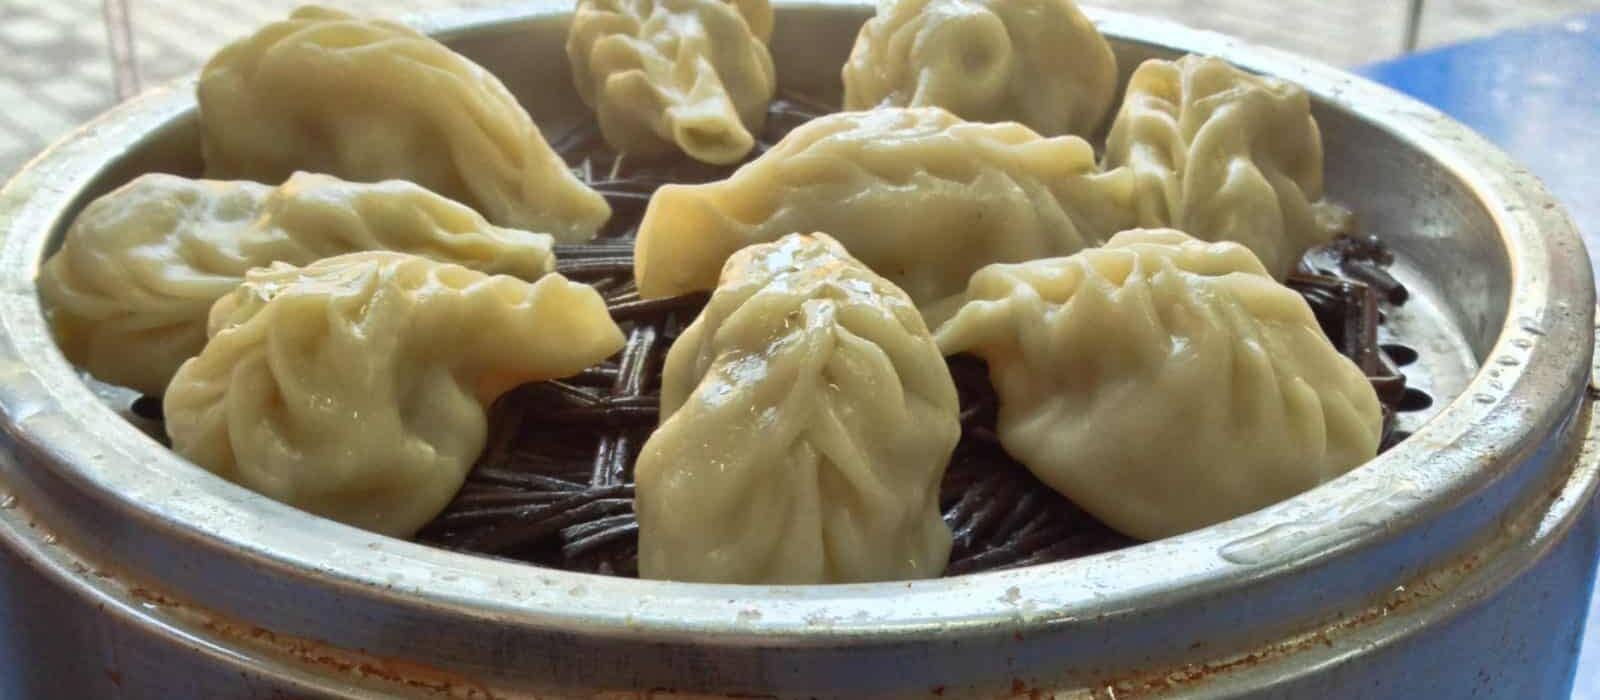 15 Delicious Traditional Chinese Foods You’ve Got to Try